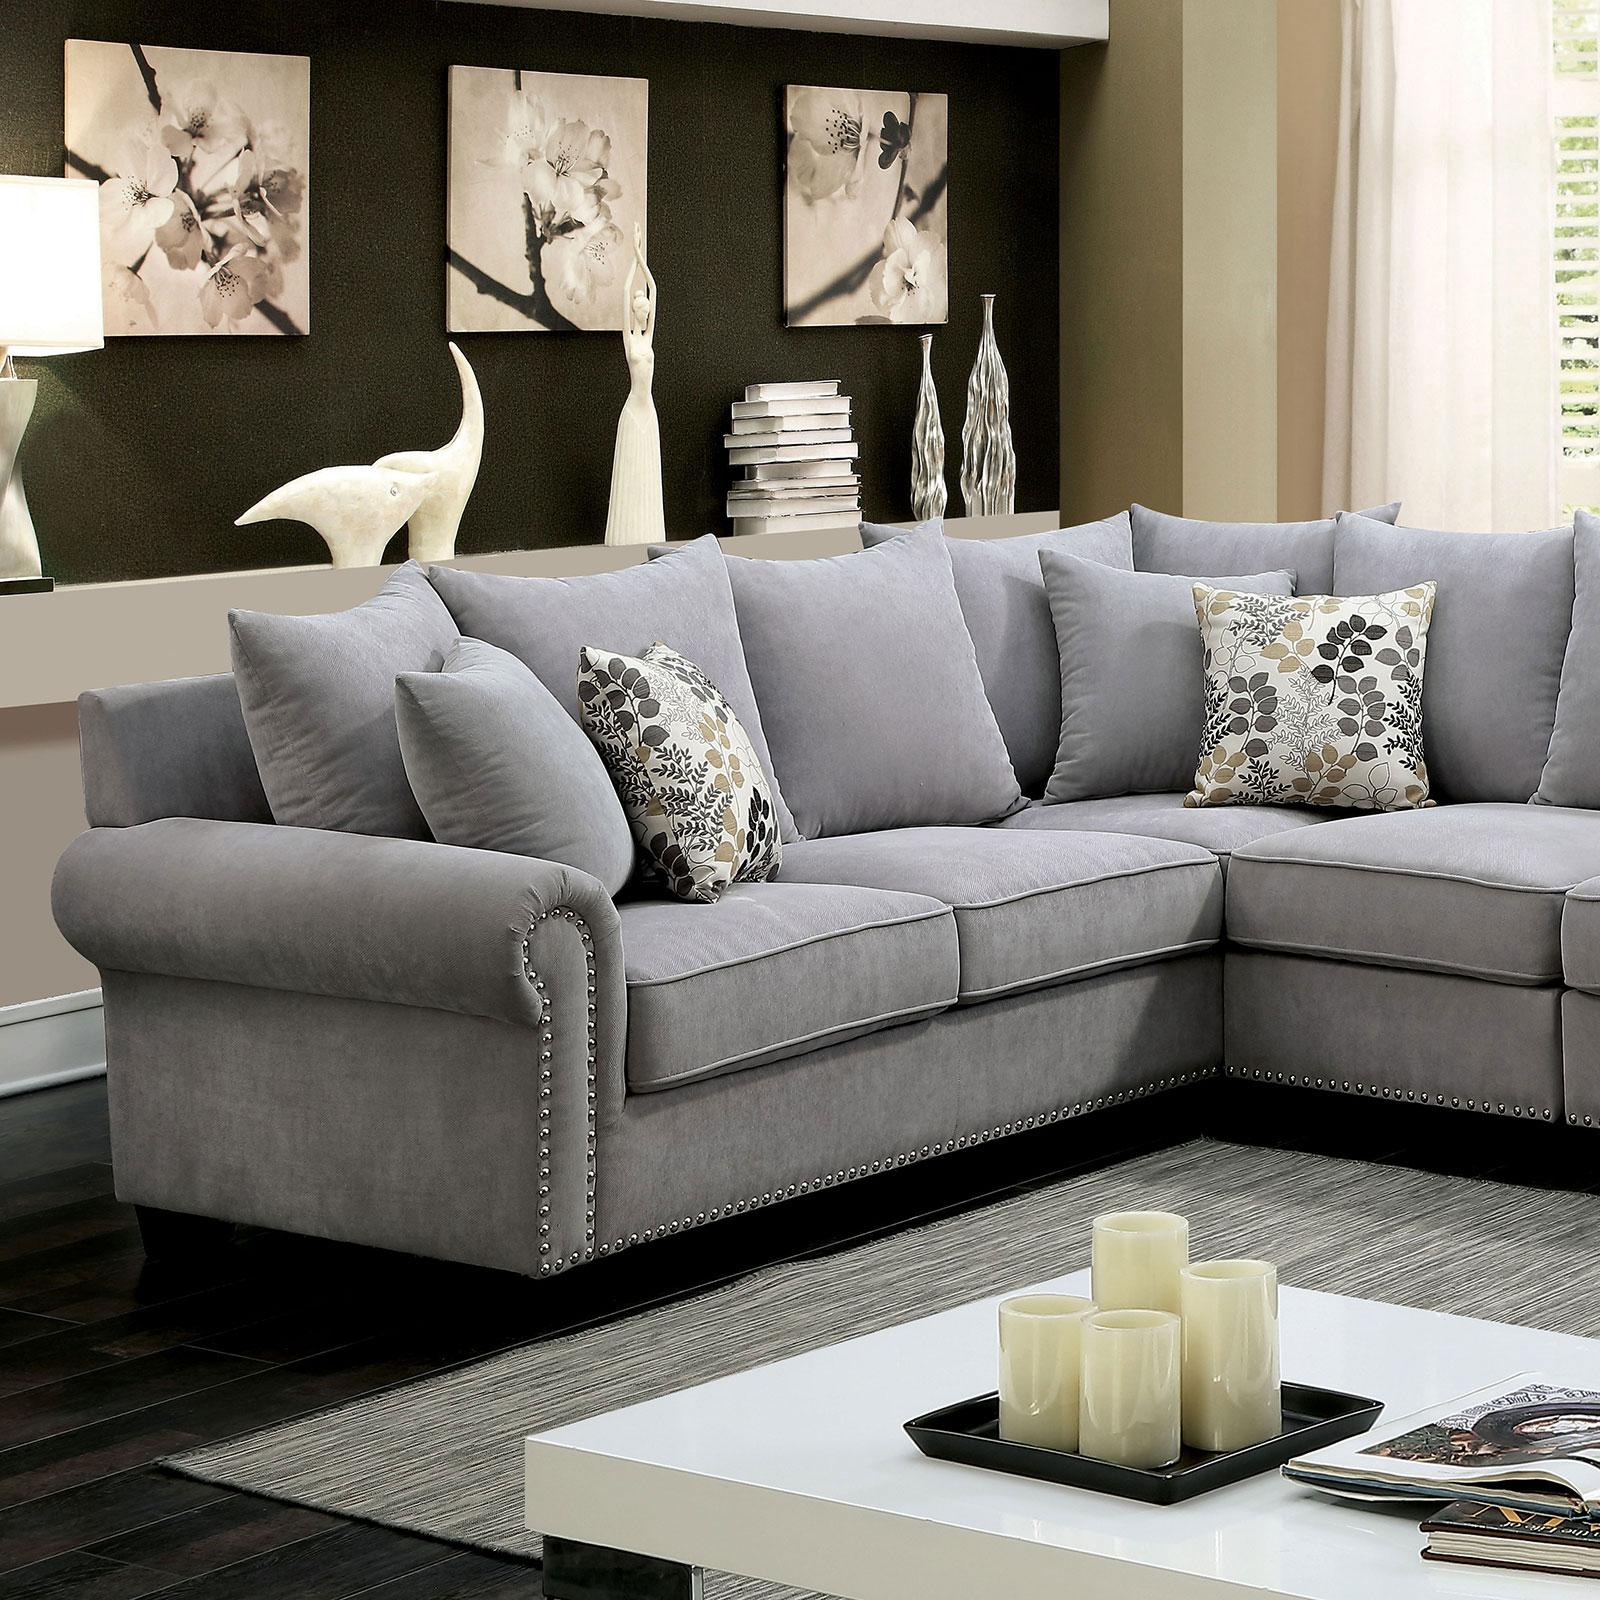 Traditional Sectional Sofa SKYLER CM6156GY CM6156GY-SECT in Gray Fabric